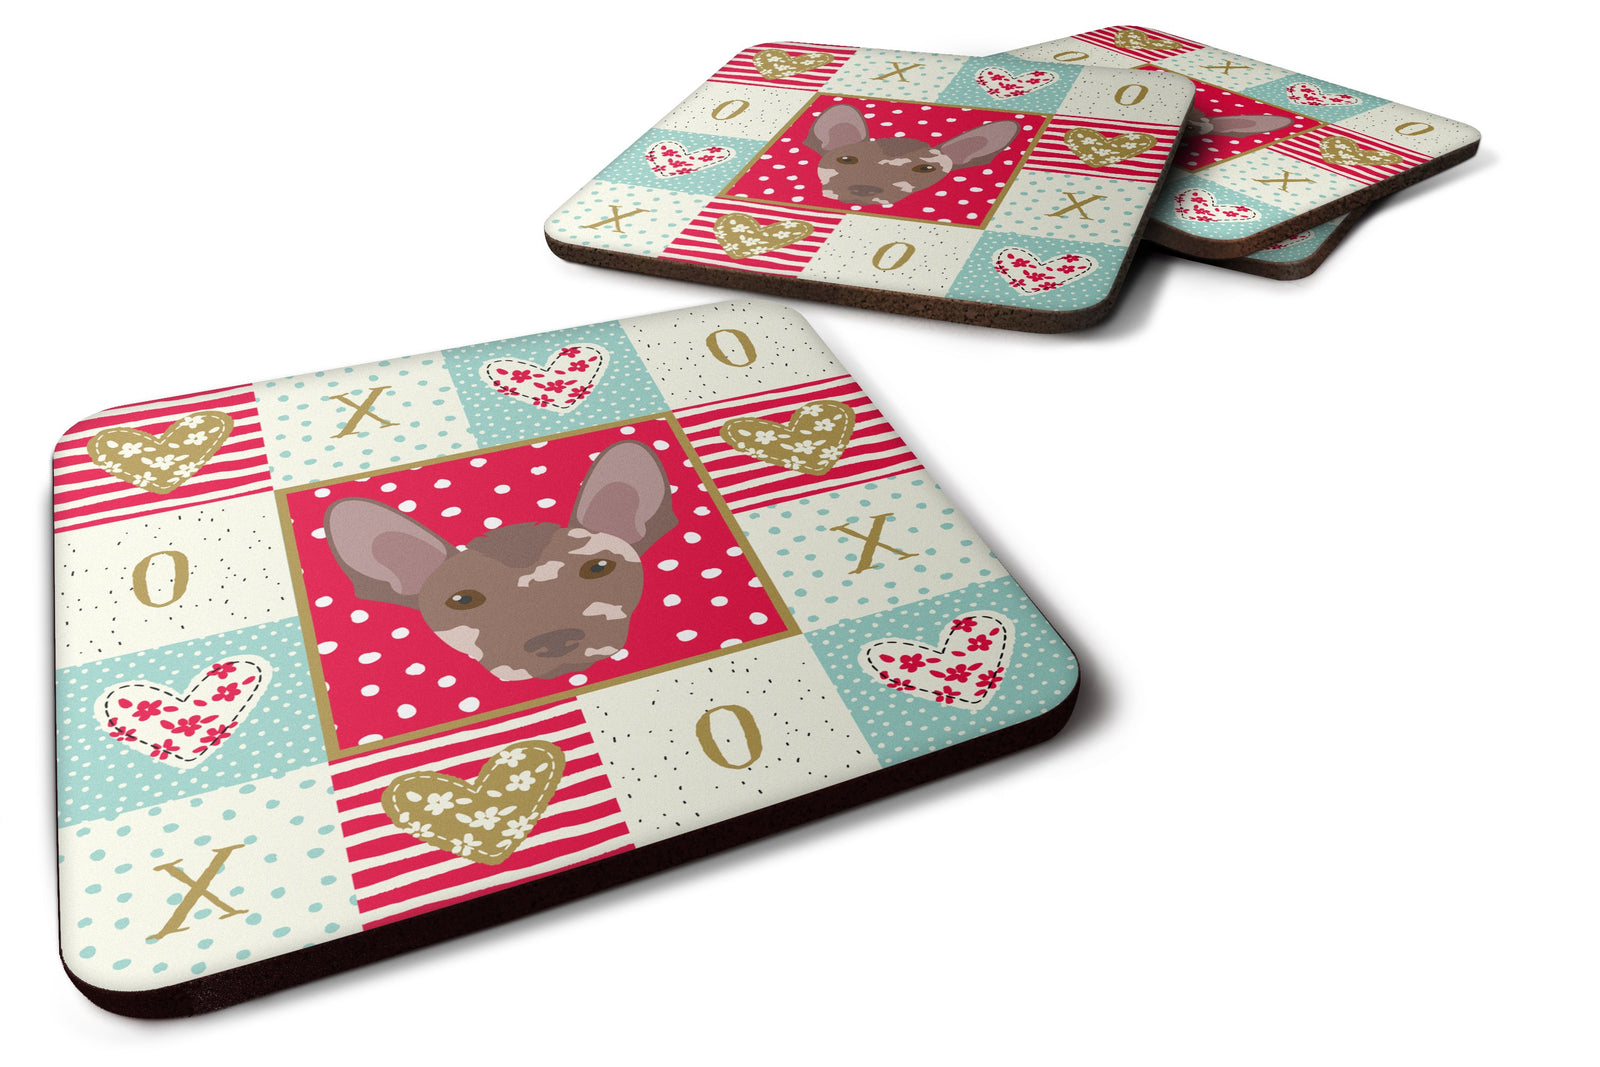 Set of 4 Mexican Hairless Dog Love Foam Coasters Set of 4 CK5219FC by Caroline's Treasures